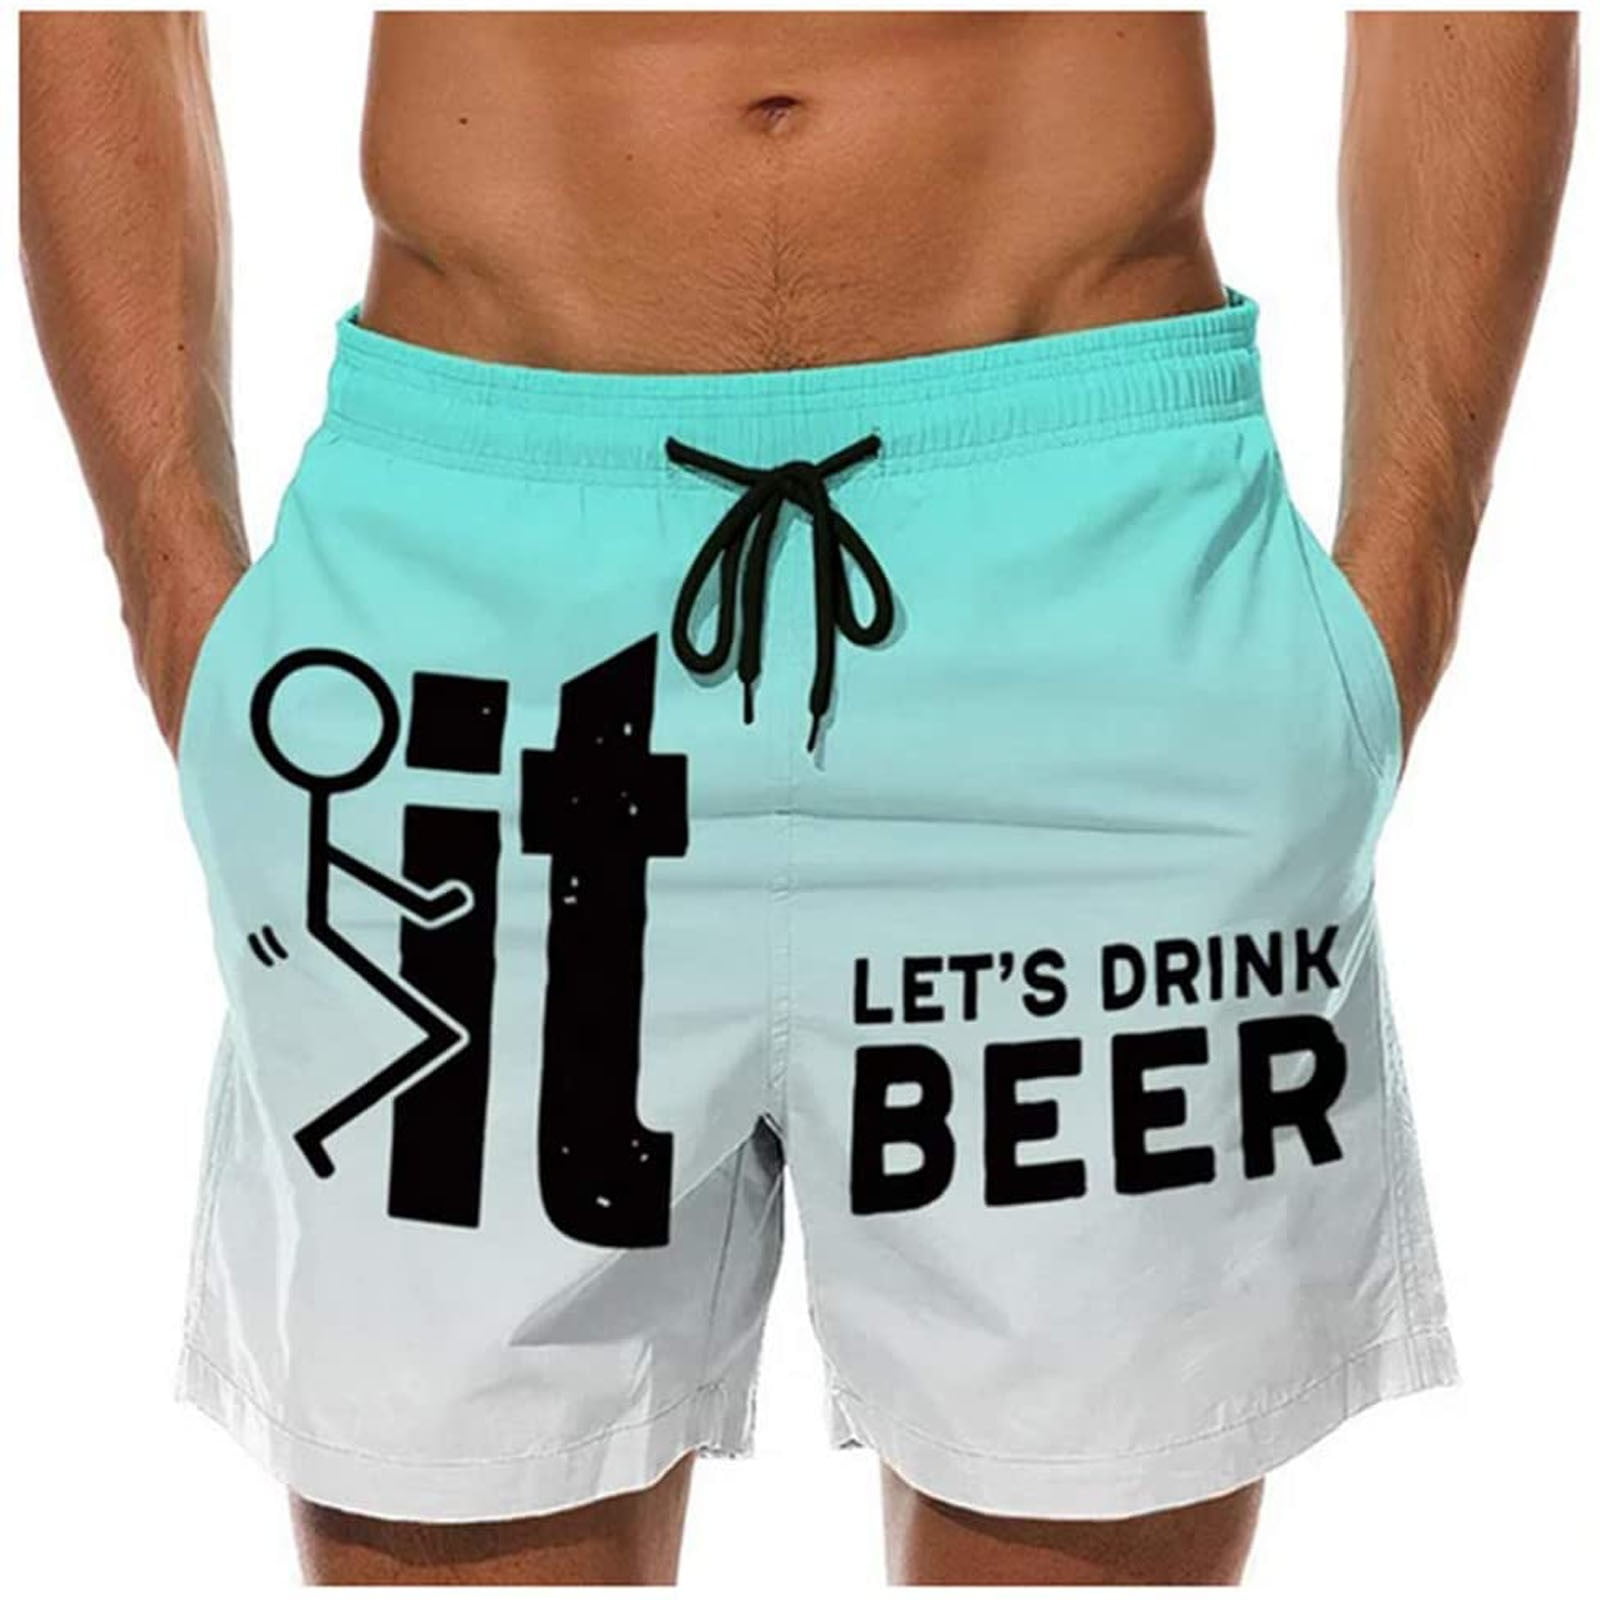 Set Vertical Stories Social Networks Anniversary Holidays Mens Swim Surfing Beach Trunks Quick Dry Board Shorts with Pockets 